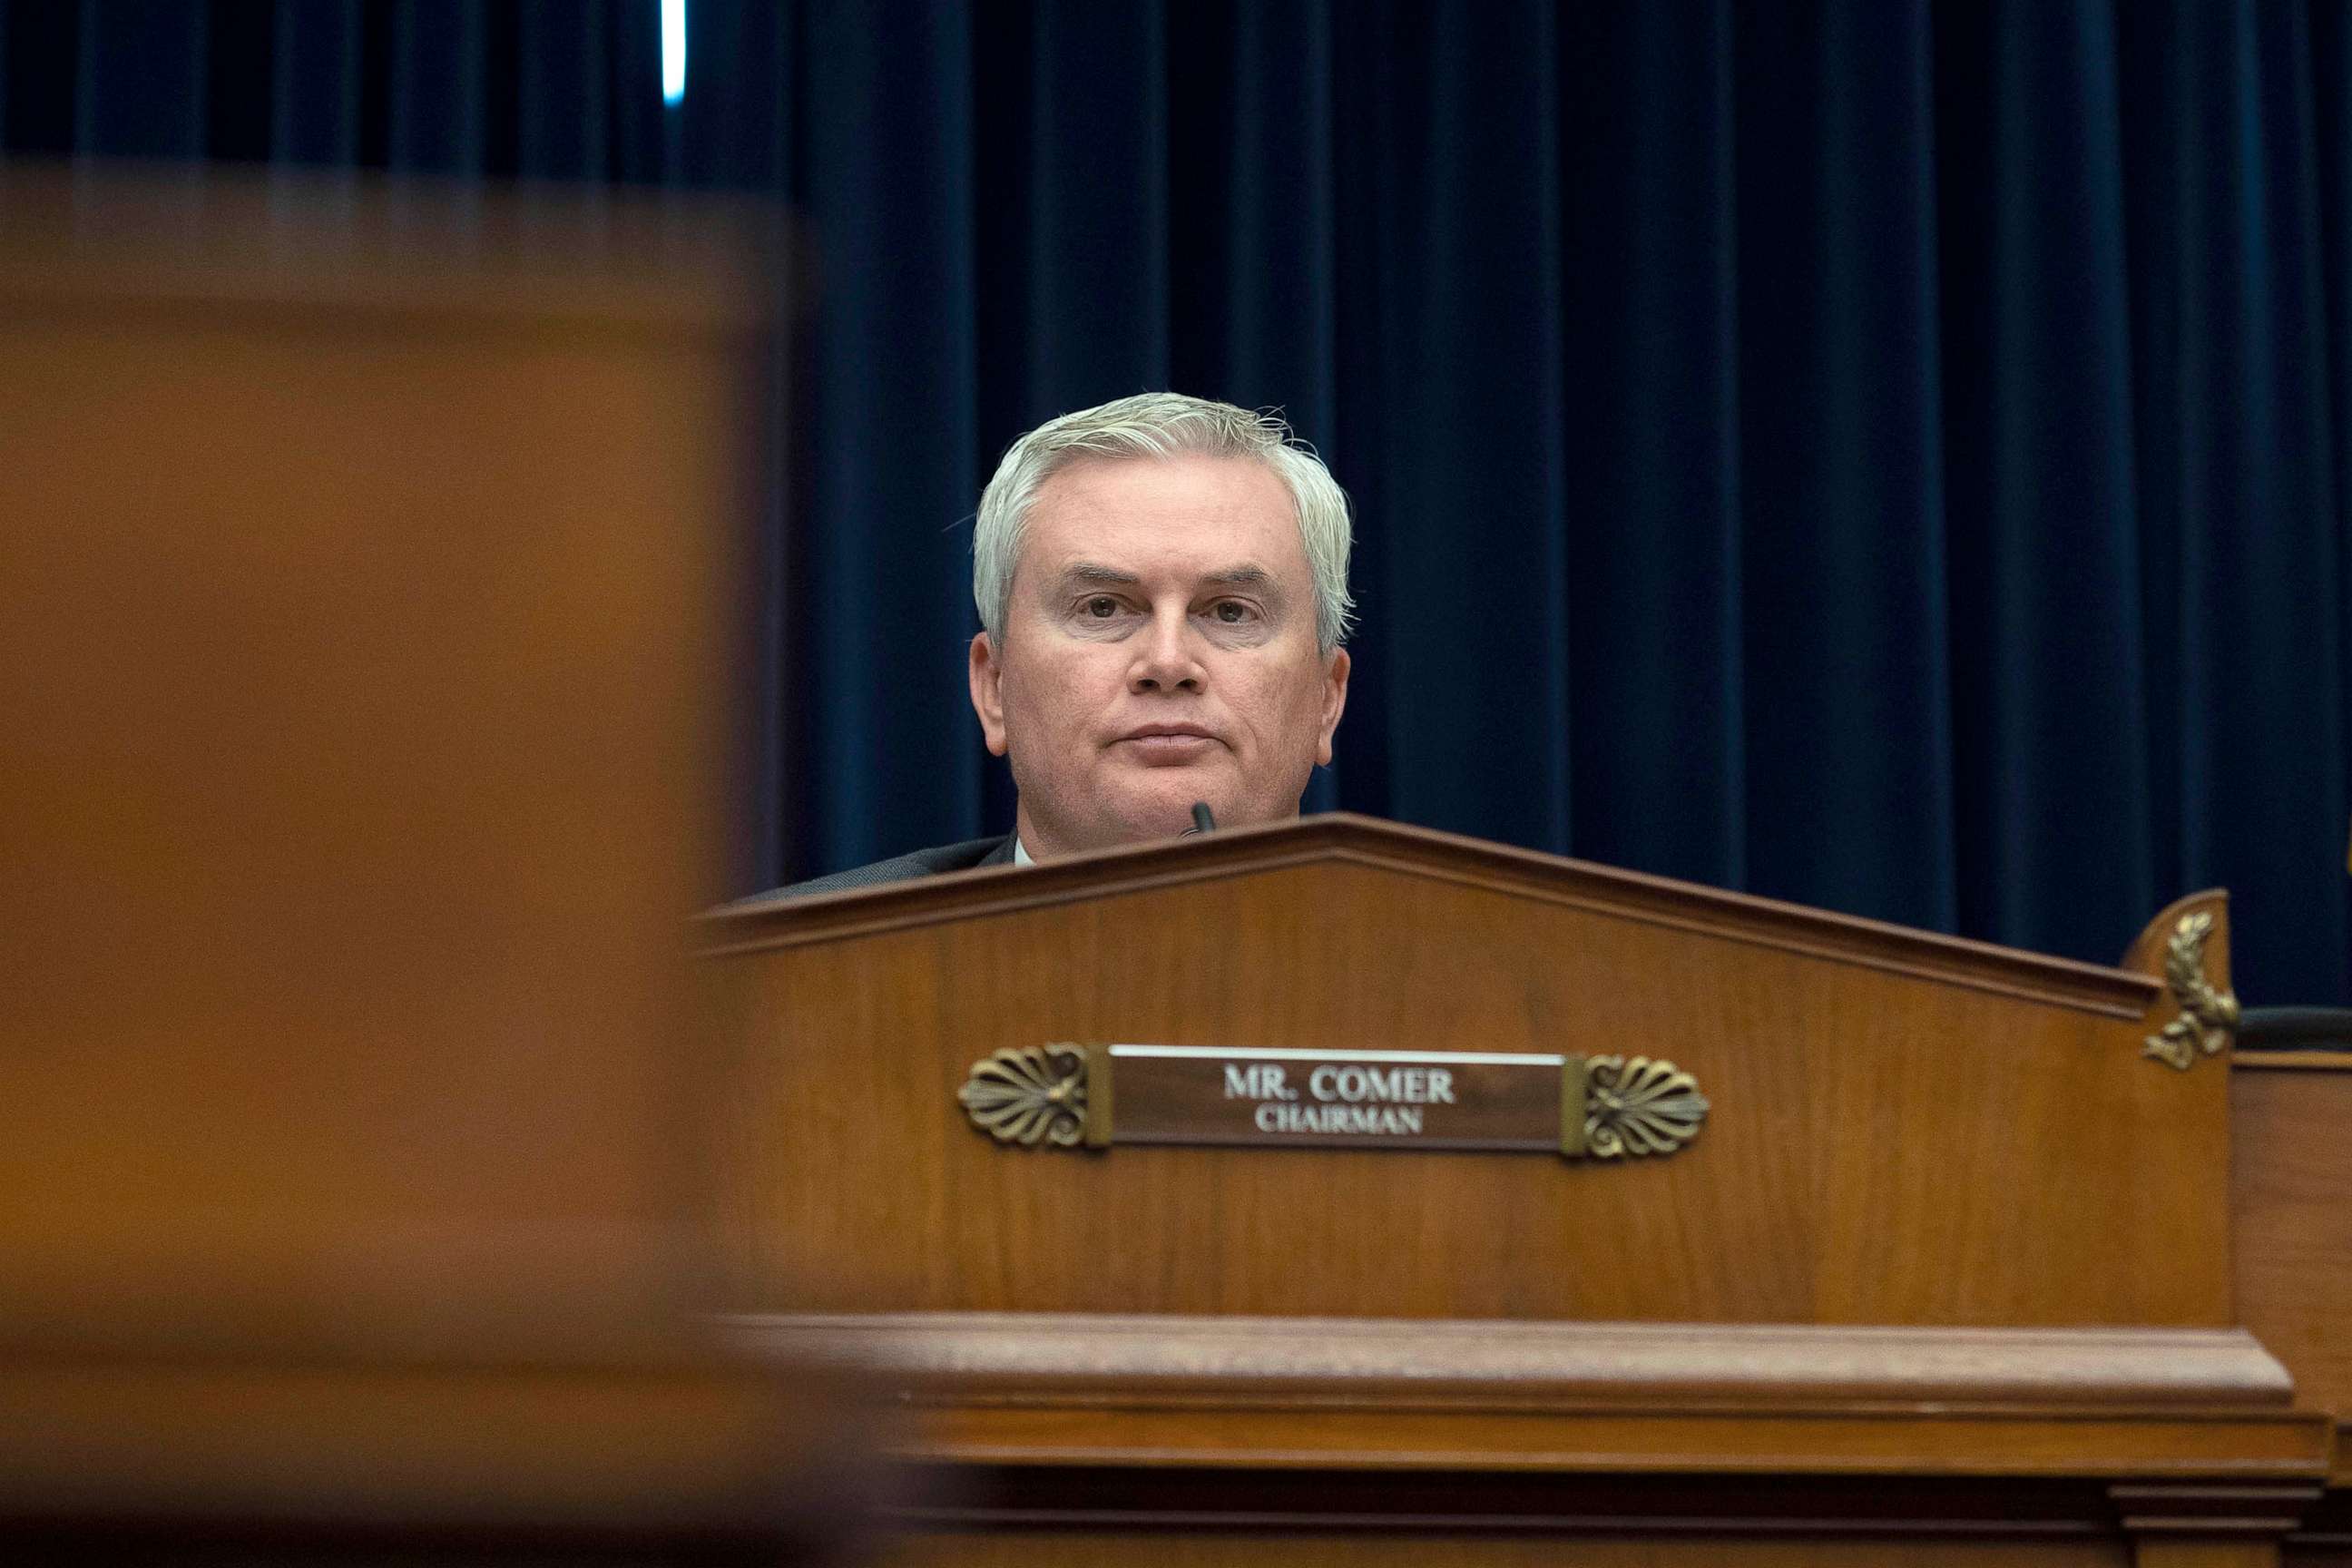 PHOTO: House Oversight and Accountability Committee Chairman Rep. James Comer listens to a witness during the committee's hearing about Congressional oversight of D.C., on Capitol Hill, in Washington, D.C., on March 29, 2023.